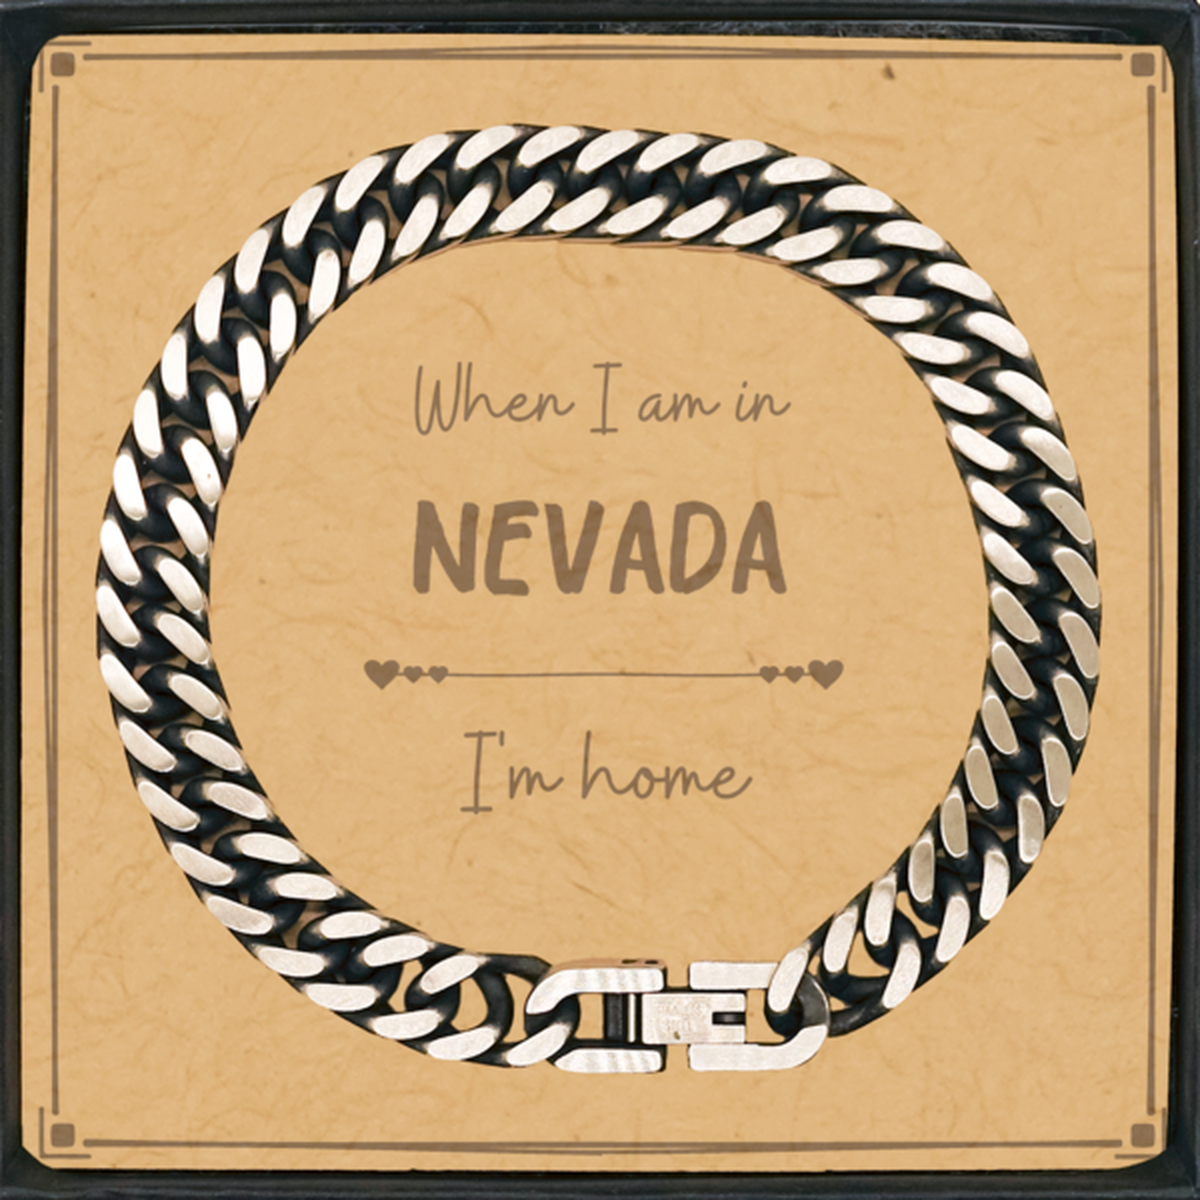 When I am in Nevada I'm home Cuban Link Chain Bracelet, Message Card Gifts For Nevada, State Nevada Birthday Gifts for Friends Coworker